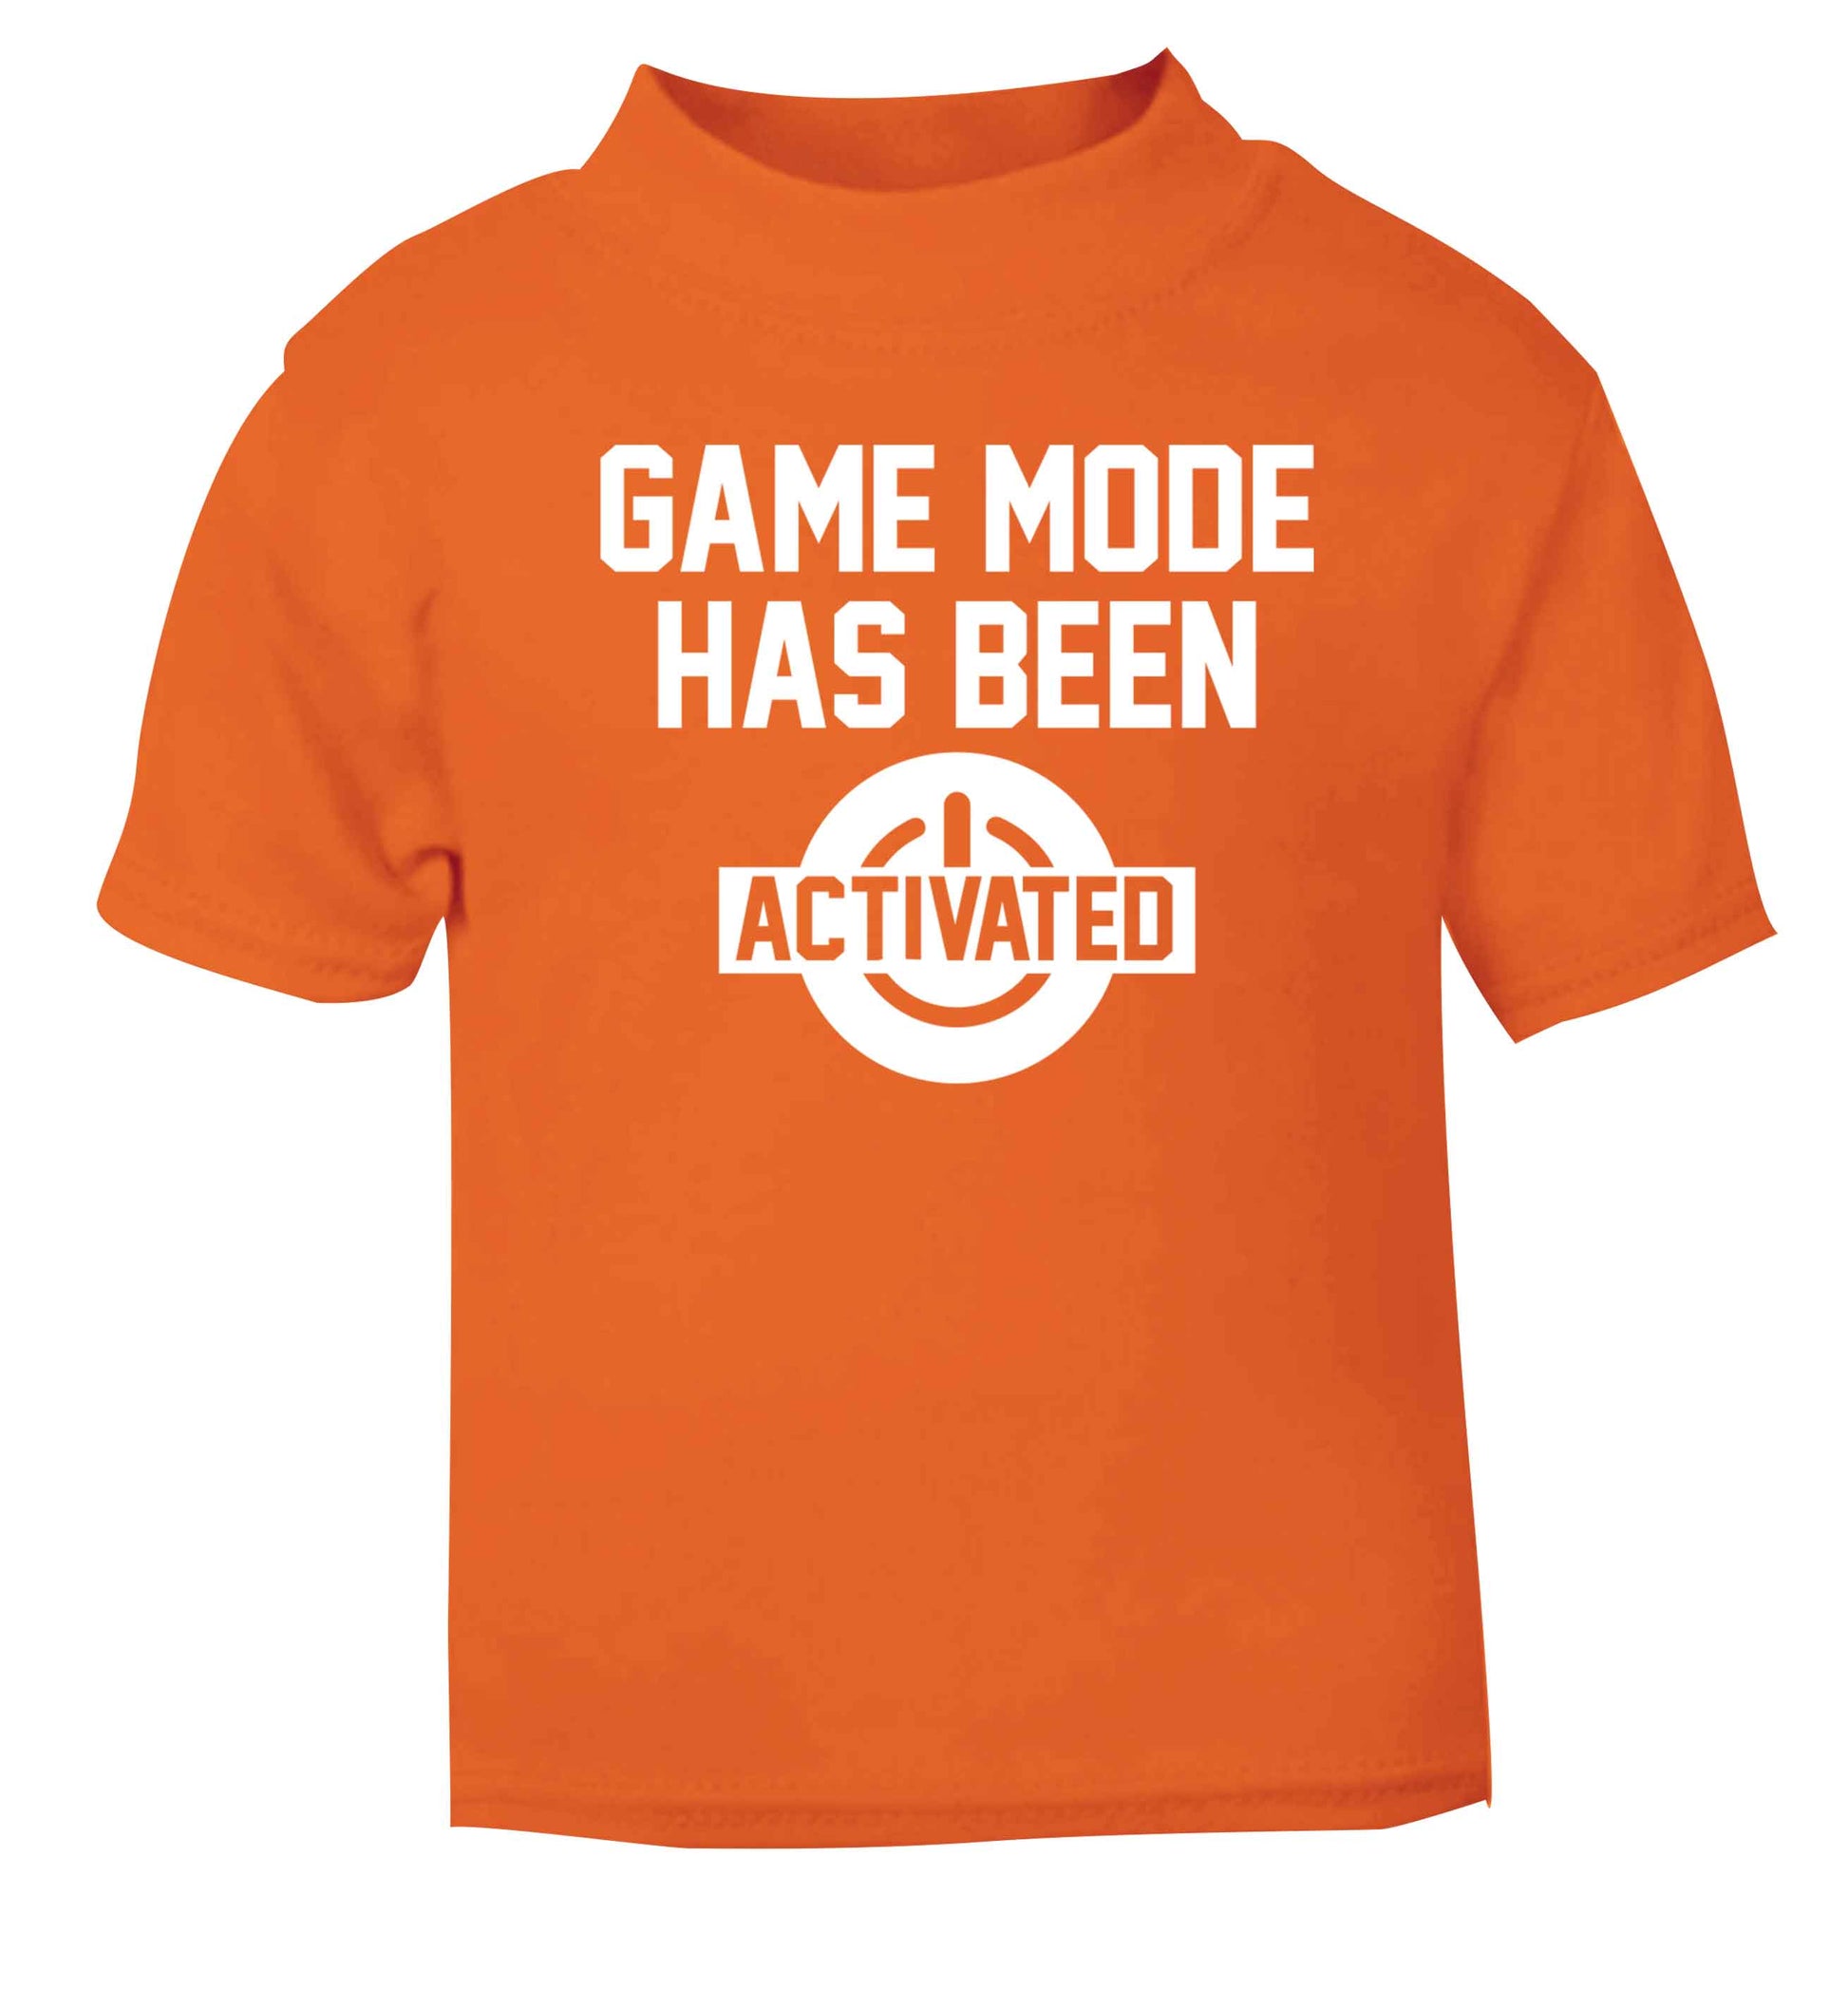 Game mode has been activated orange baby toddler Tshirt 2 Years